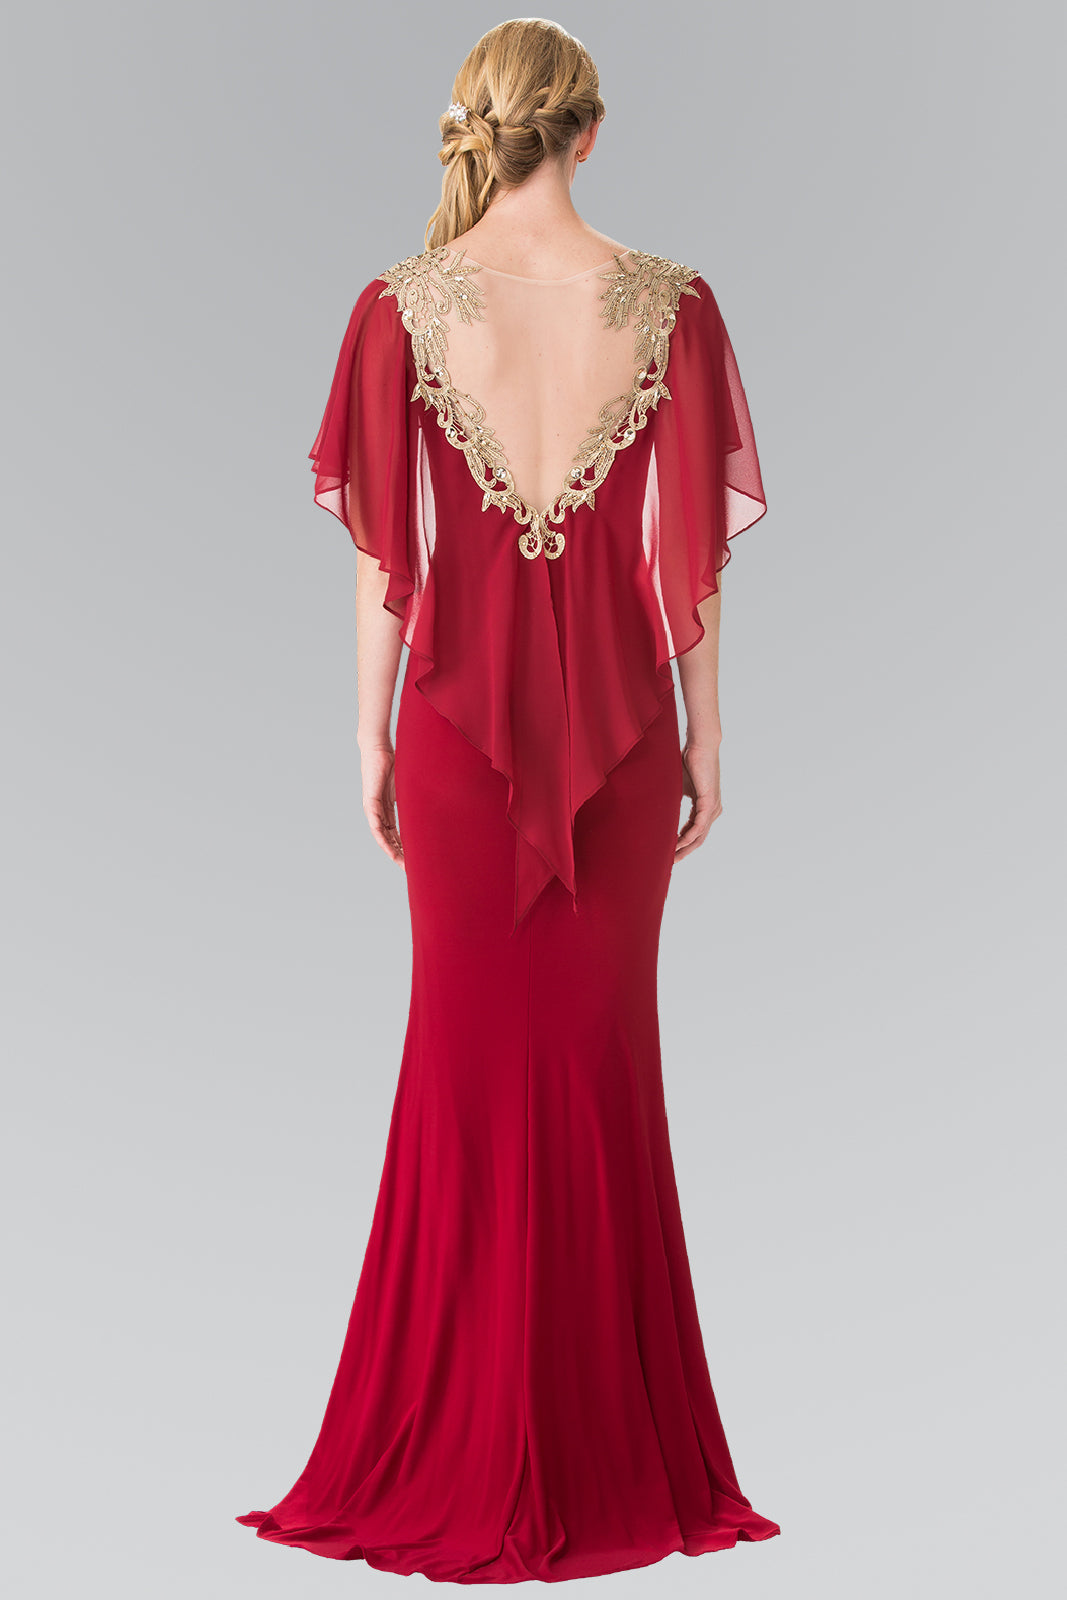 Sleeveless Jersey Long Dress with Attached Cape that Drapes Down the Back GLGL2254 Elsy Style MOTHER OF BRIDE